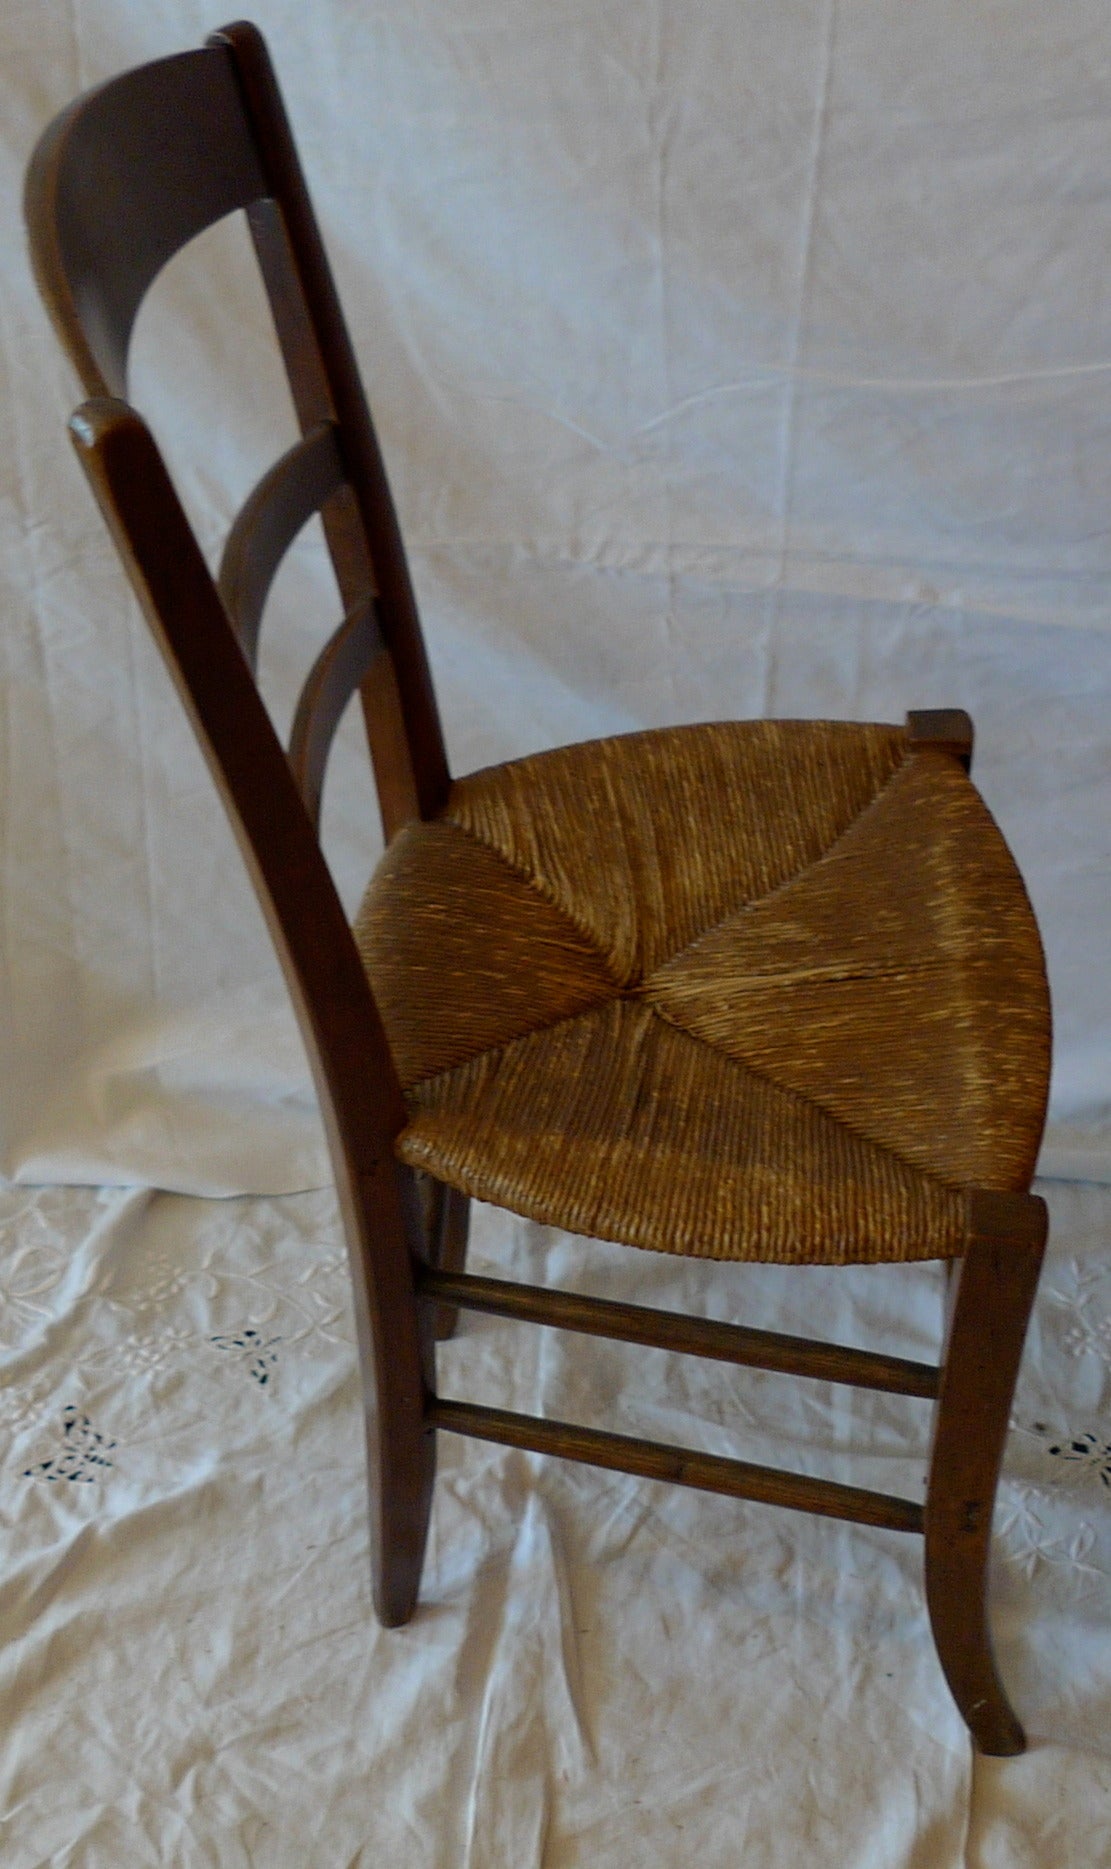 Late 19th Century French 19th Century Country Ladder Back Side Chair With Rush Seat.